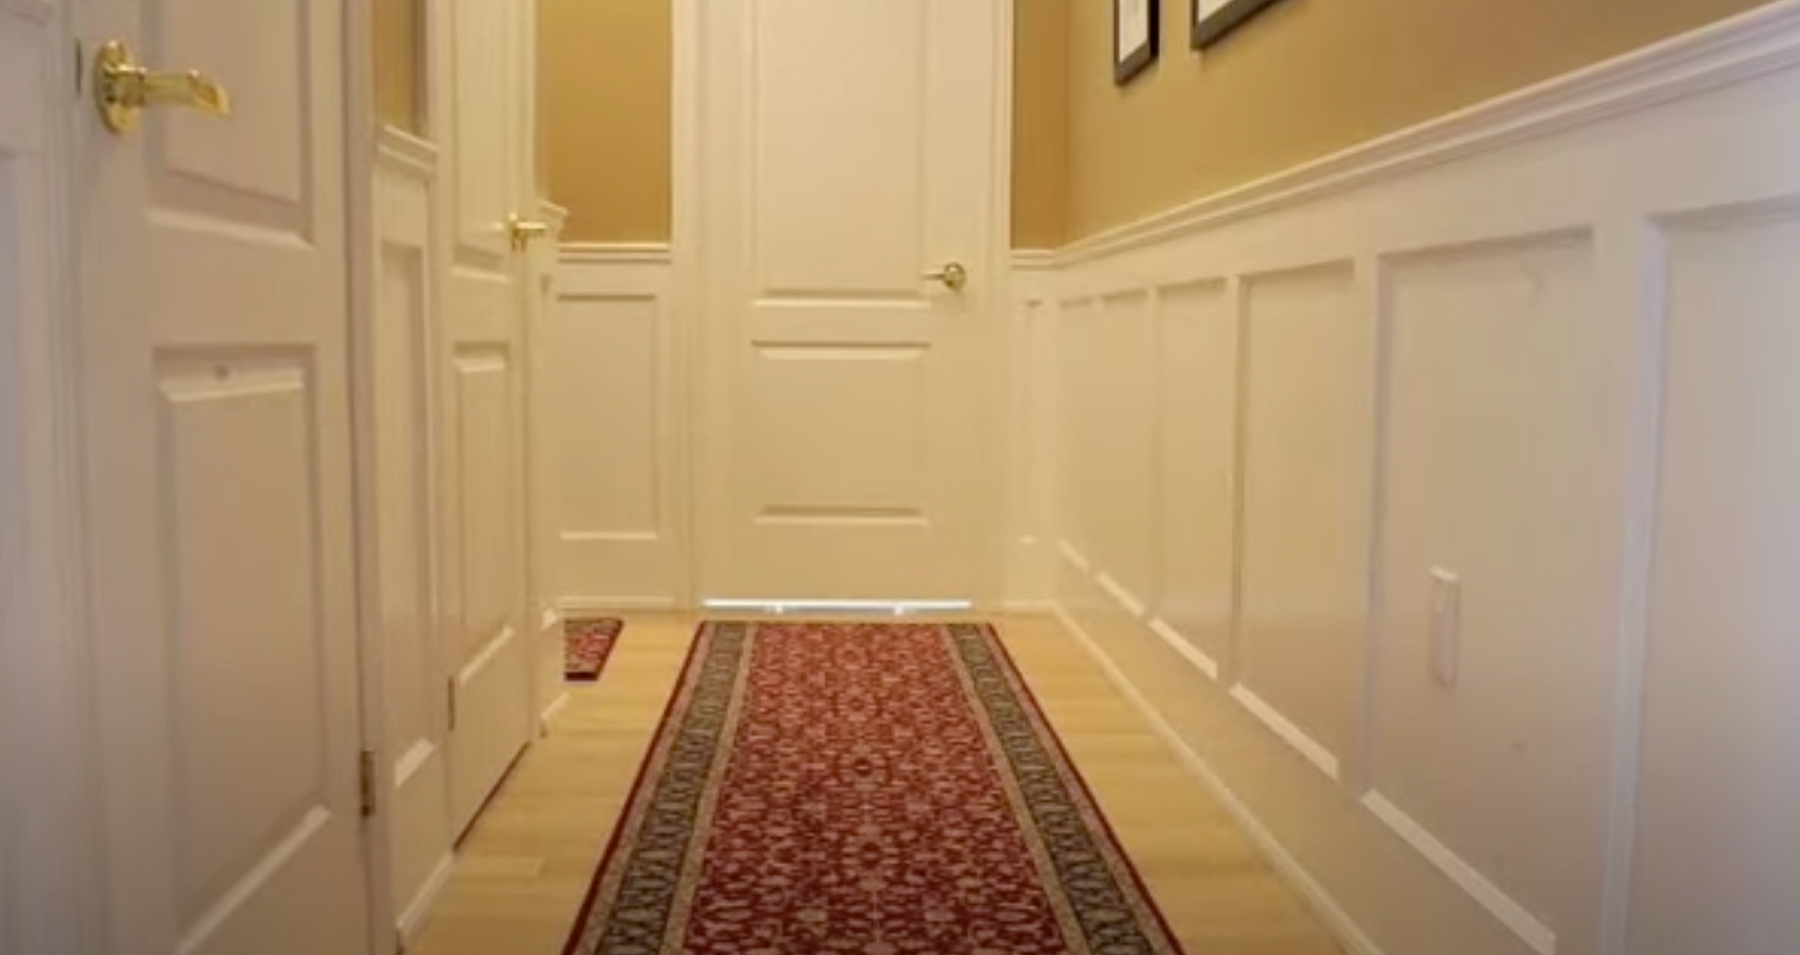 How To Install Wainscoting Kit-Part 1